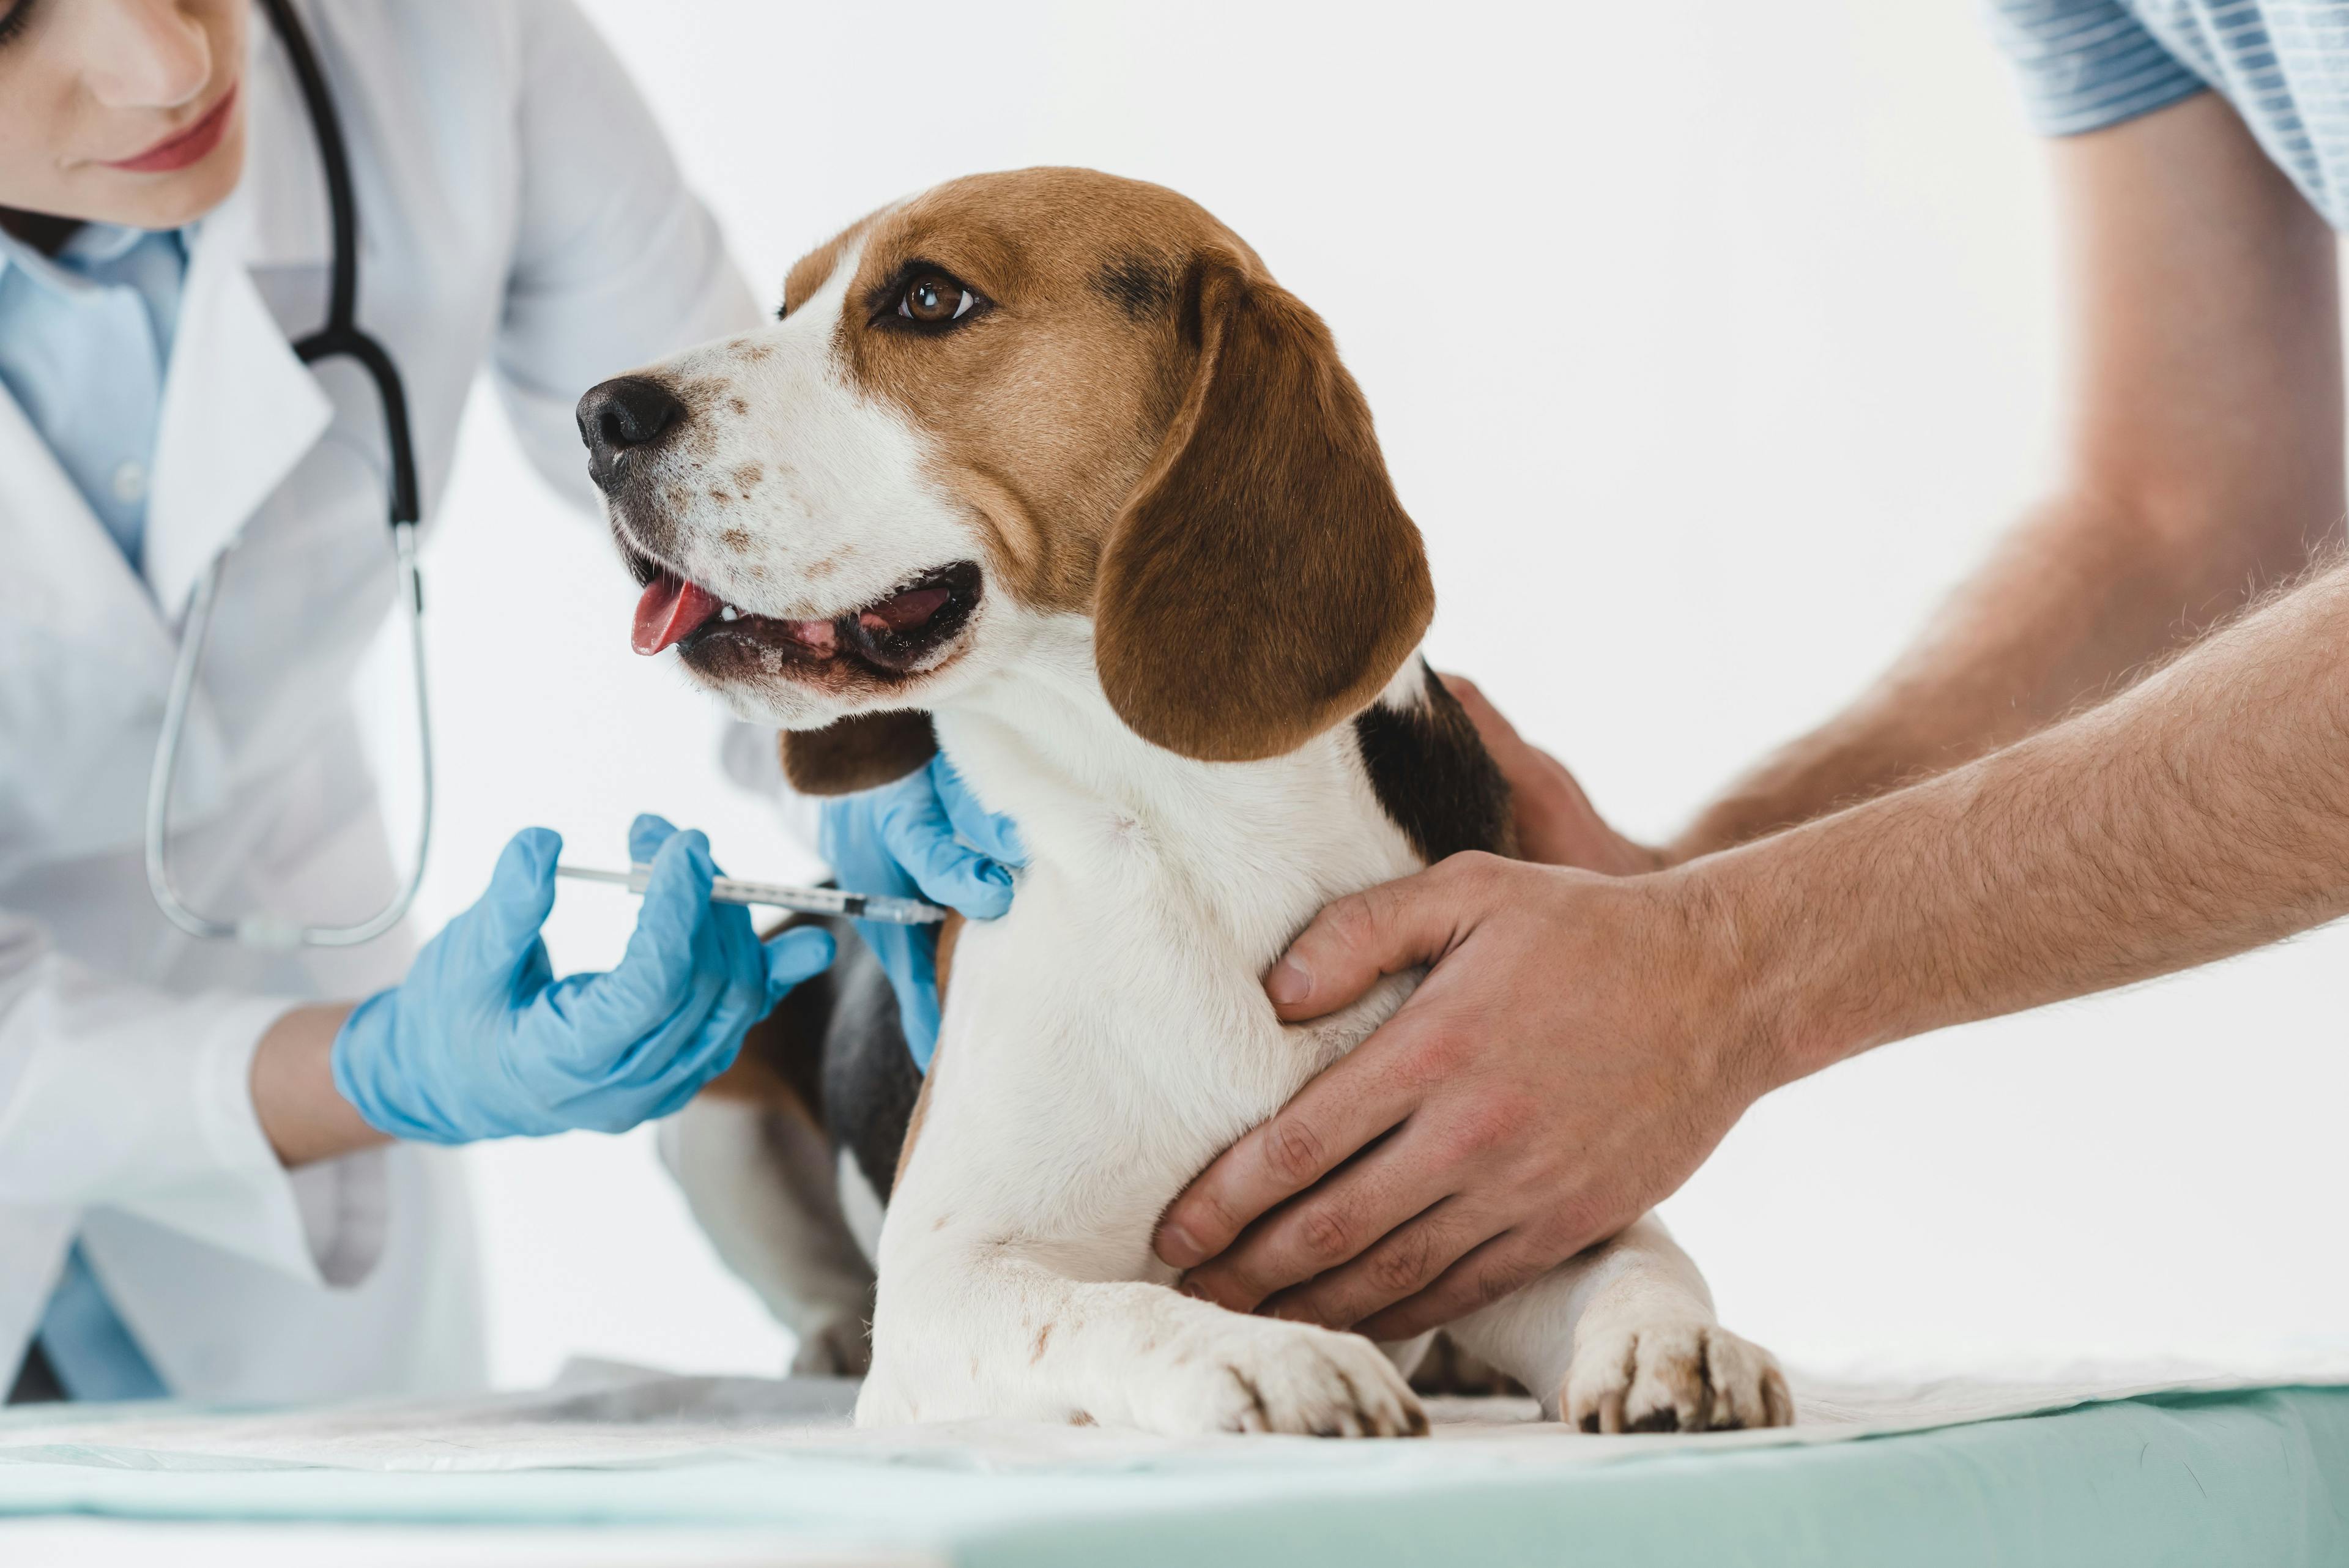 Animal health company assures veterinarians that OA drugs are safe